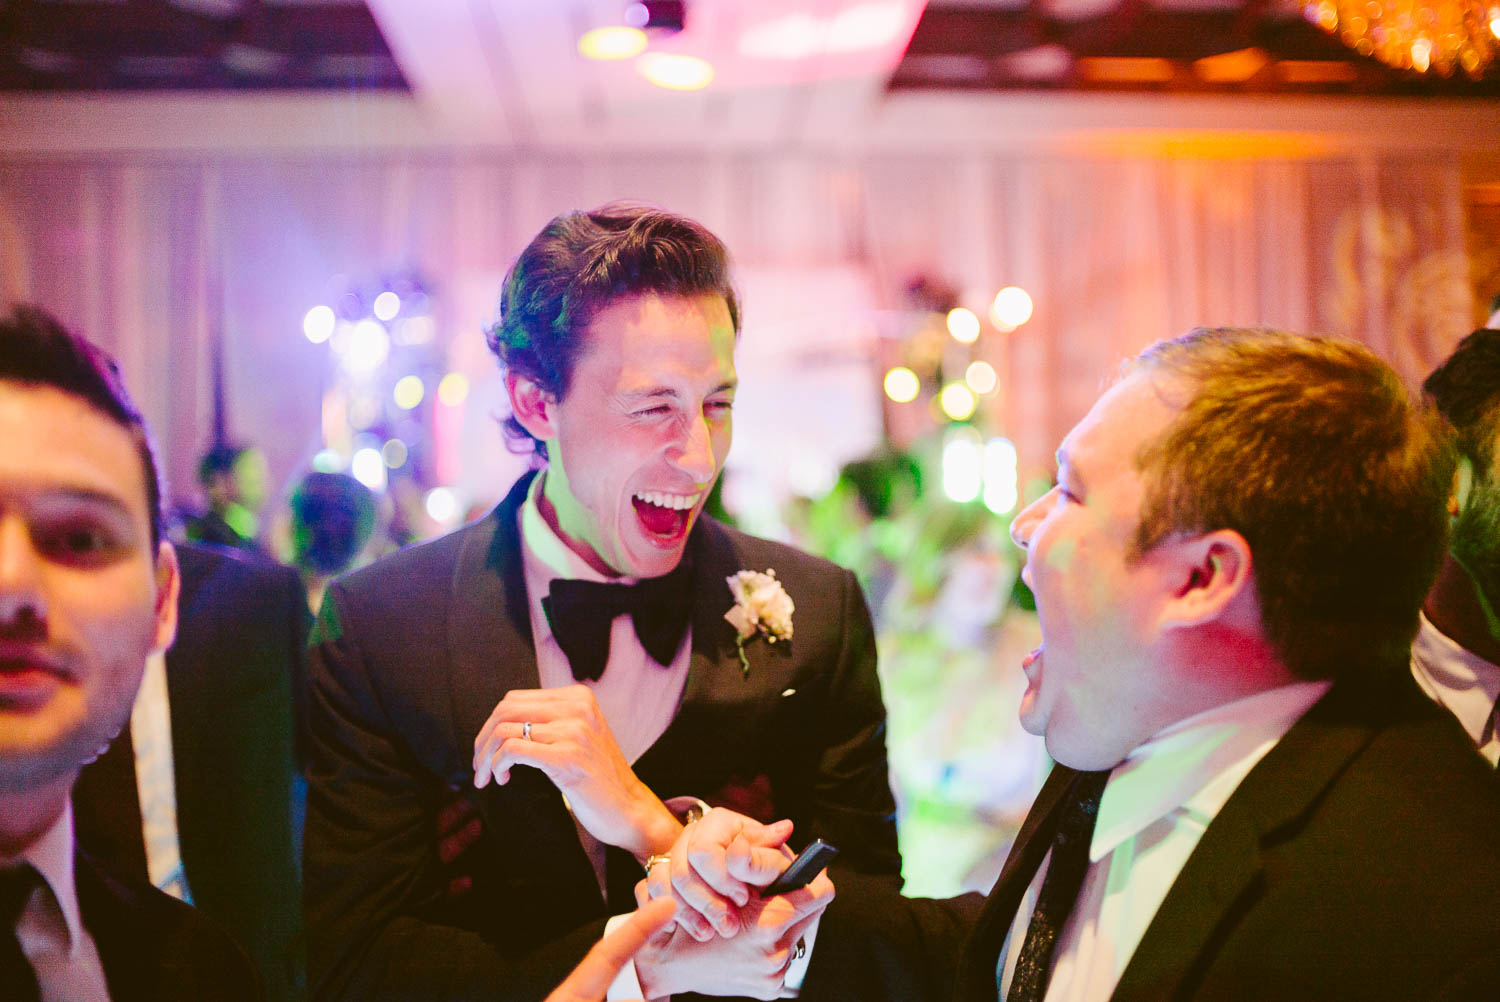 Grooms bursts out laughing and joking with wedding guest at la-cantera-resort-wedding-photographer-philip-thomas-090